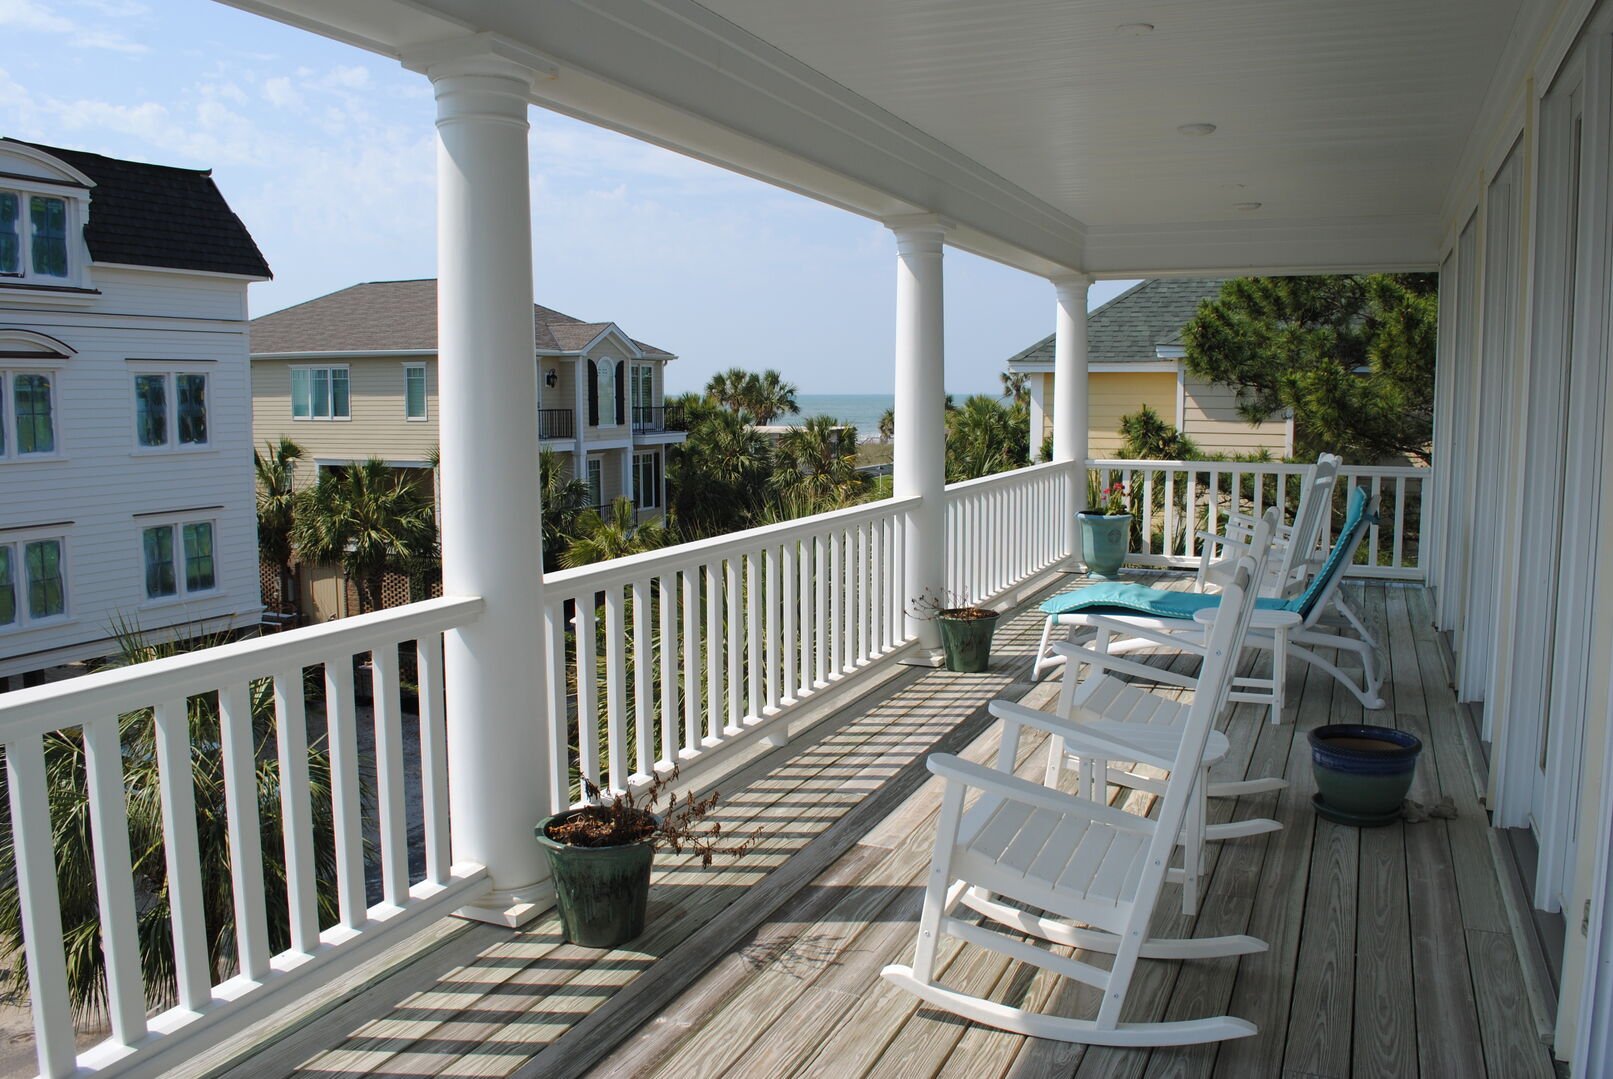 Covered Porch with Ocean Views - Second Floor